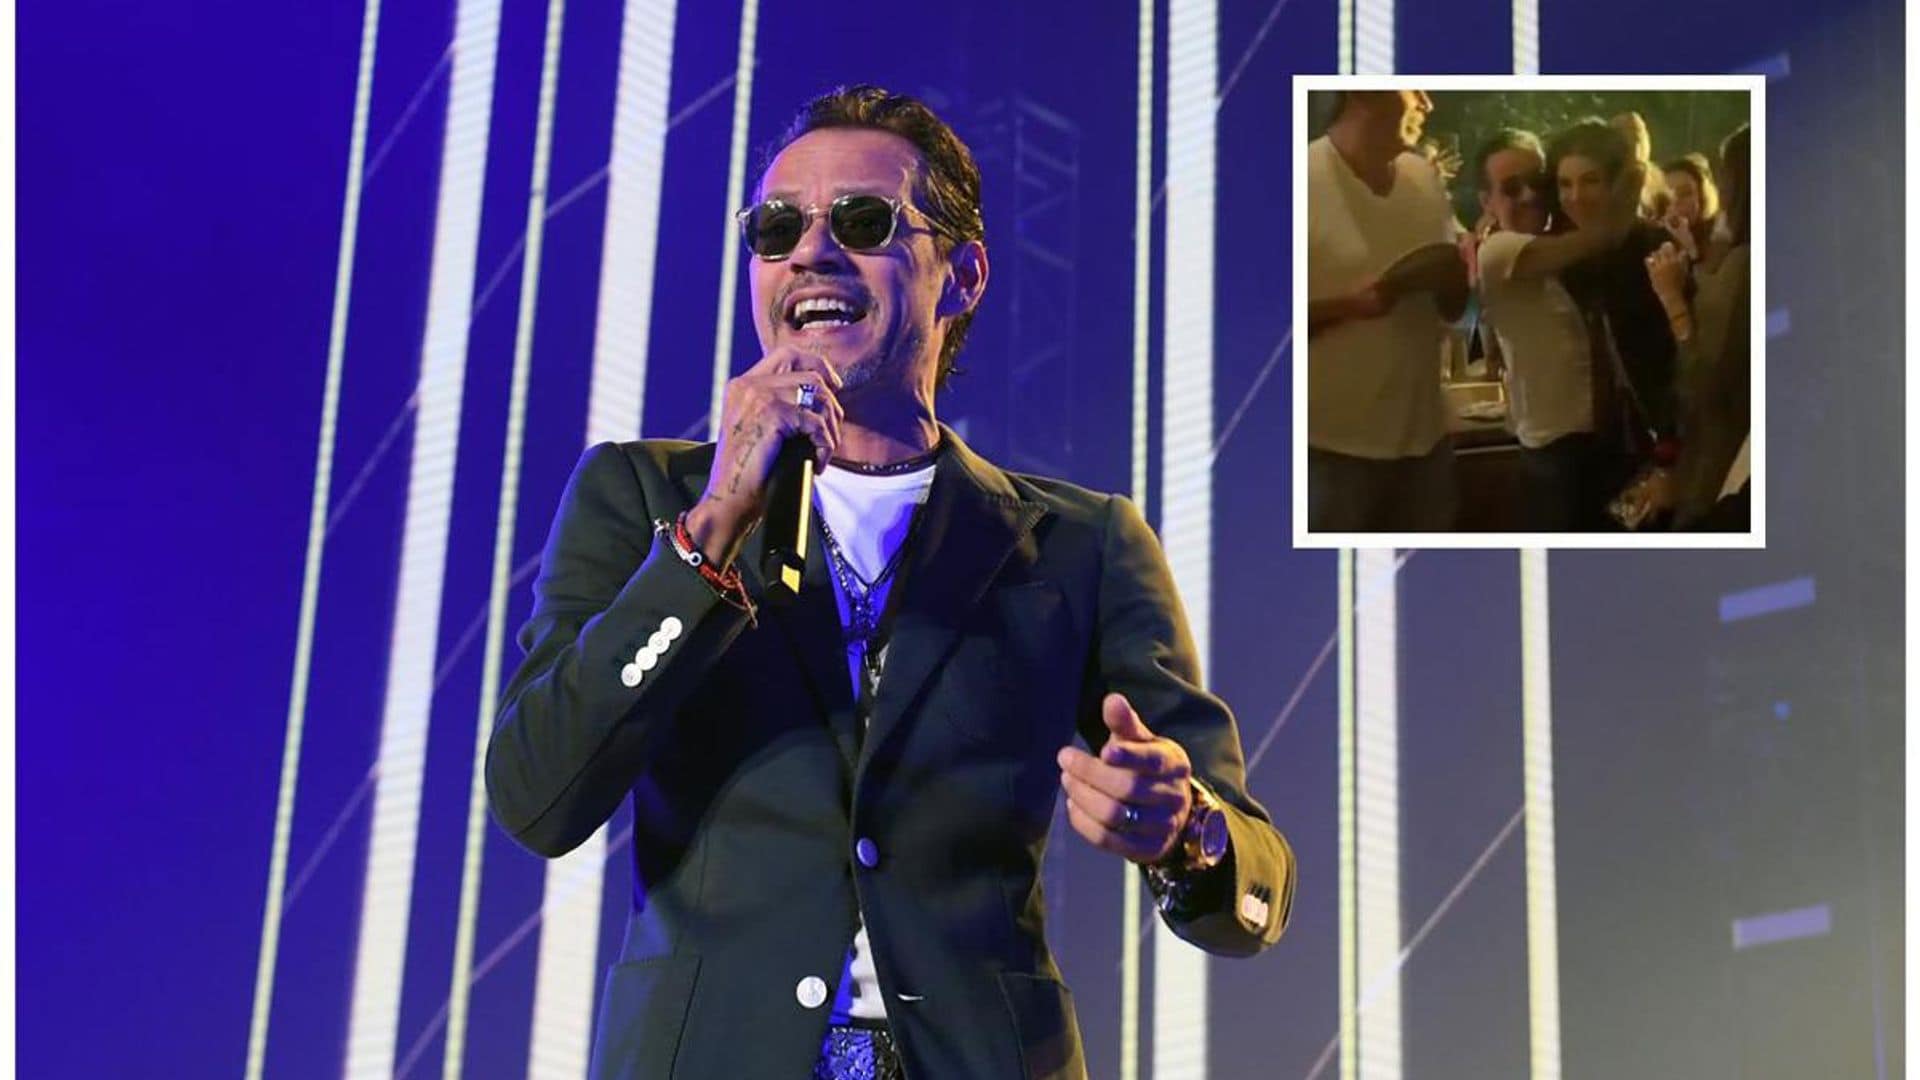 Marc Anthony goes partying in Mexico City with his new love